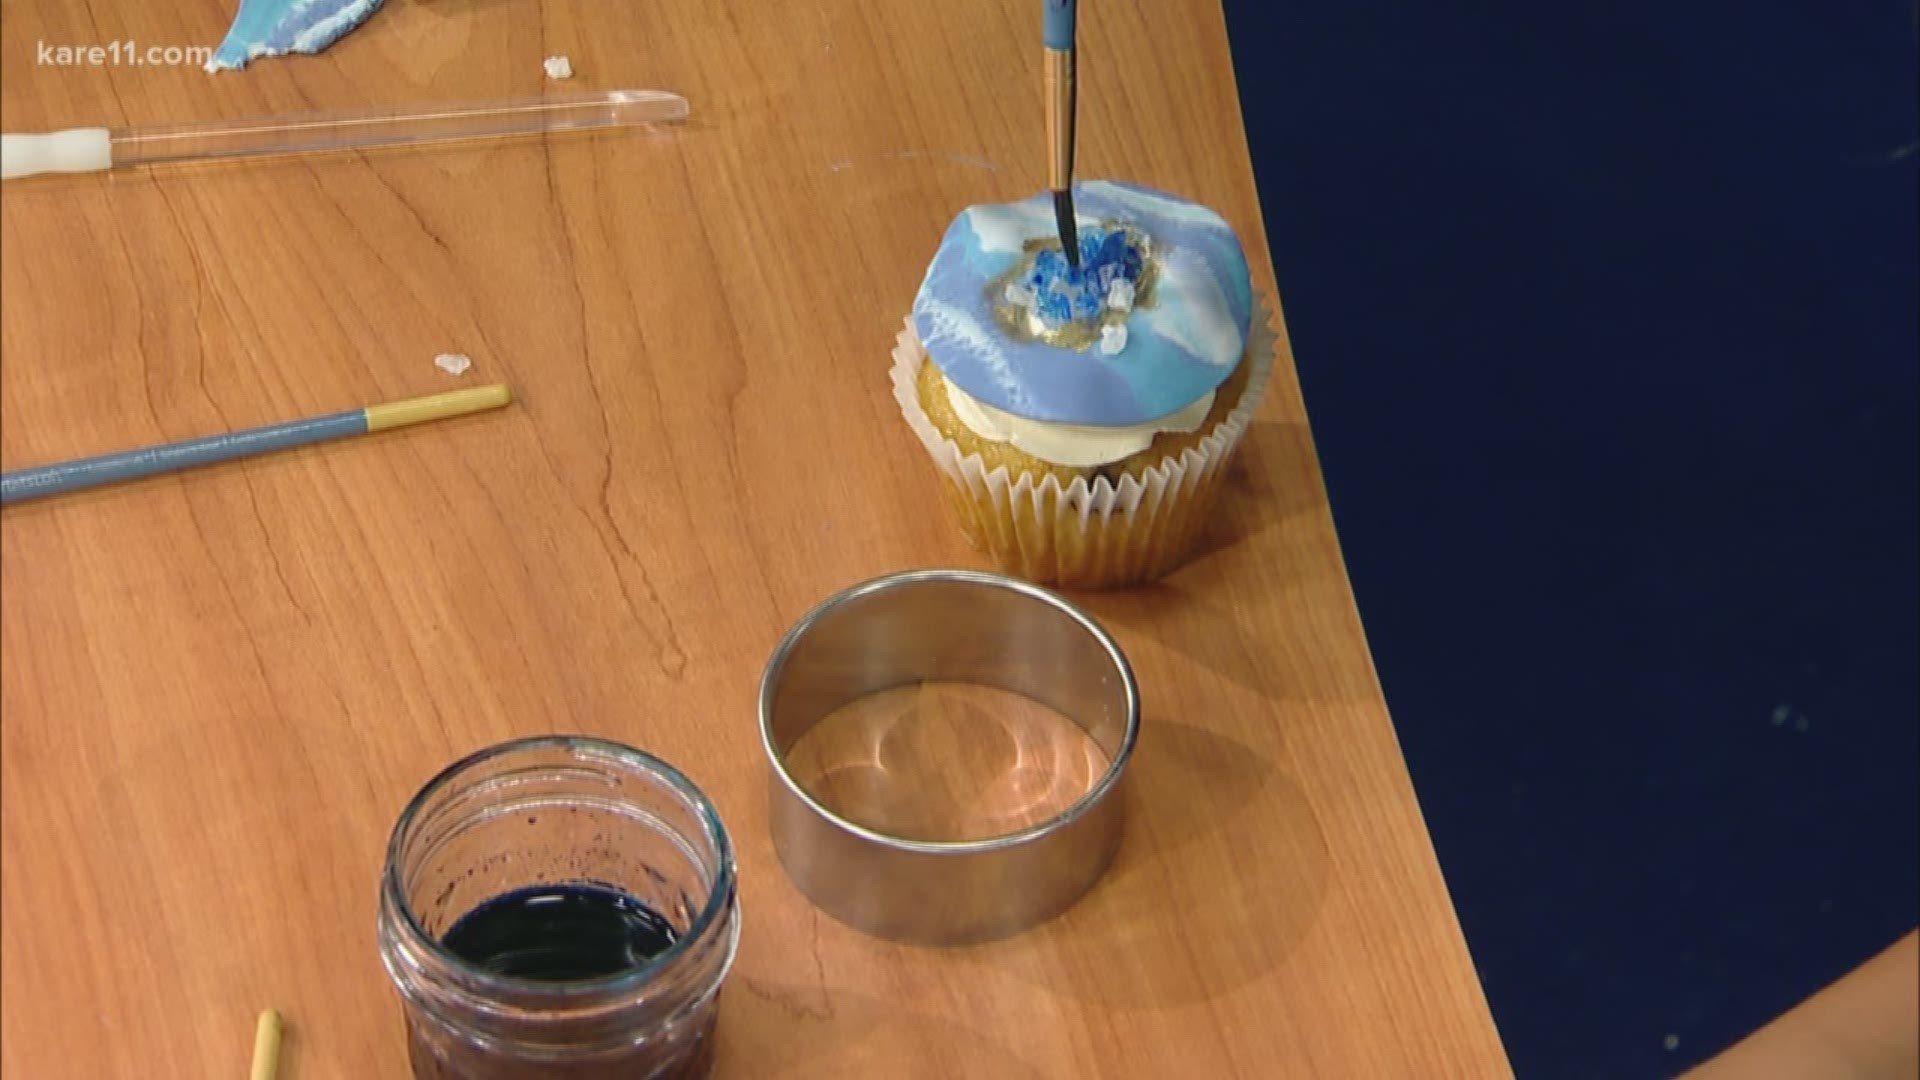 Hot off the Netflix trail, the local MN business stopped by with some cupcake decorating tips.